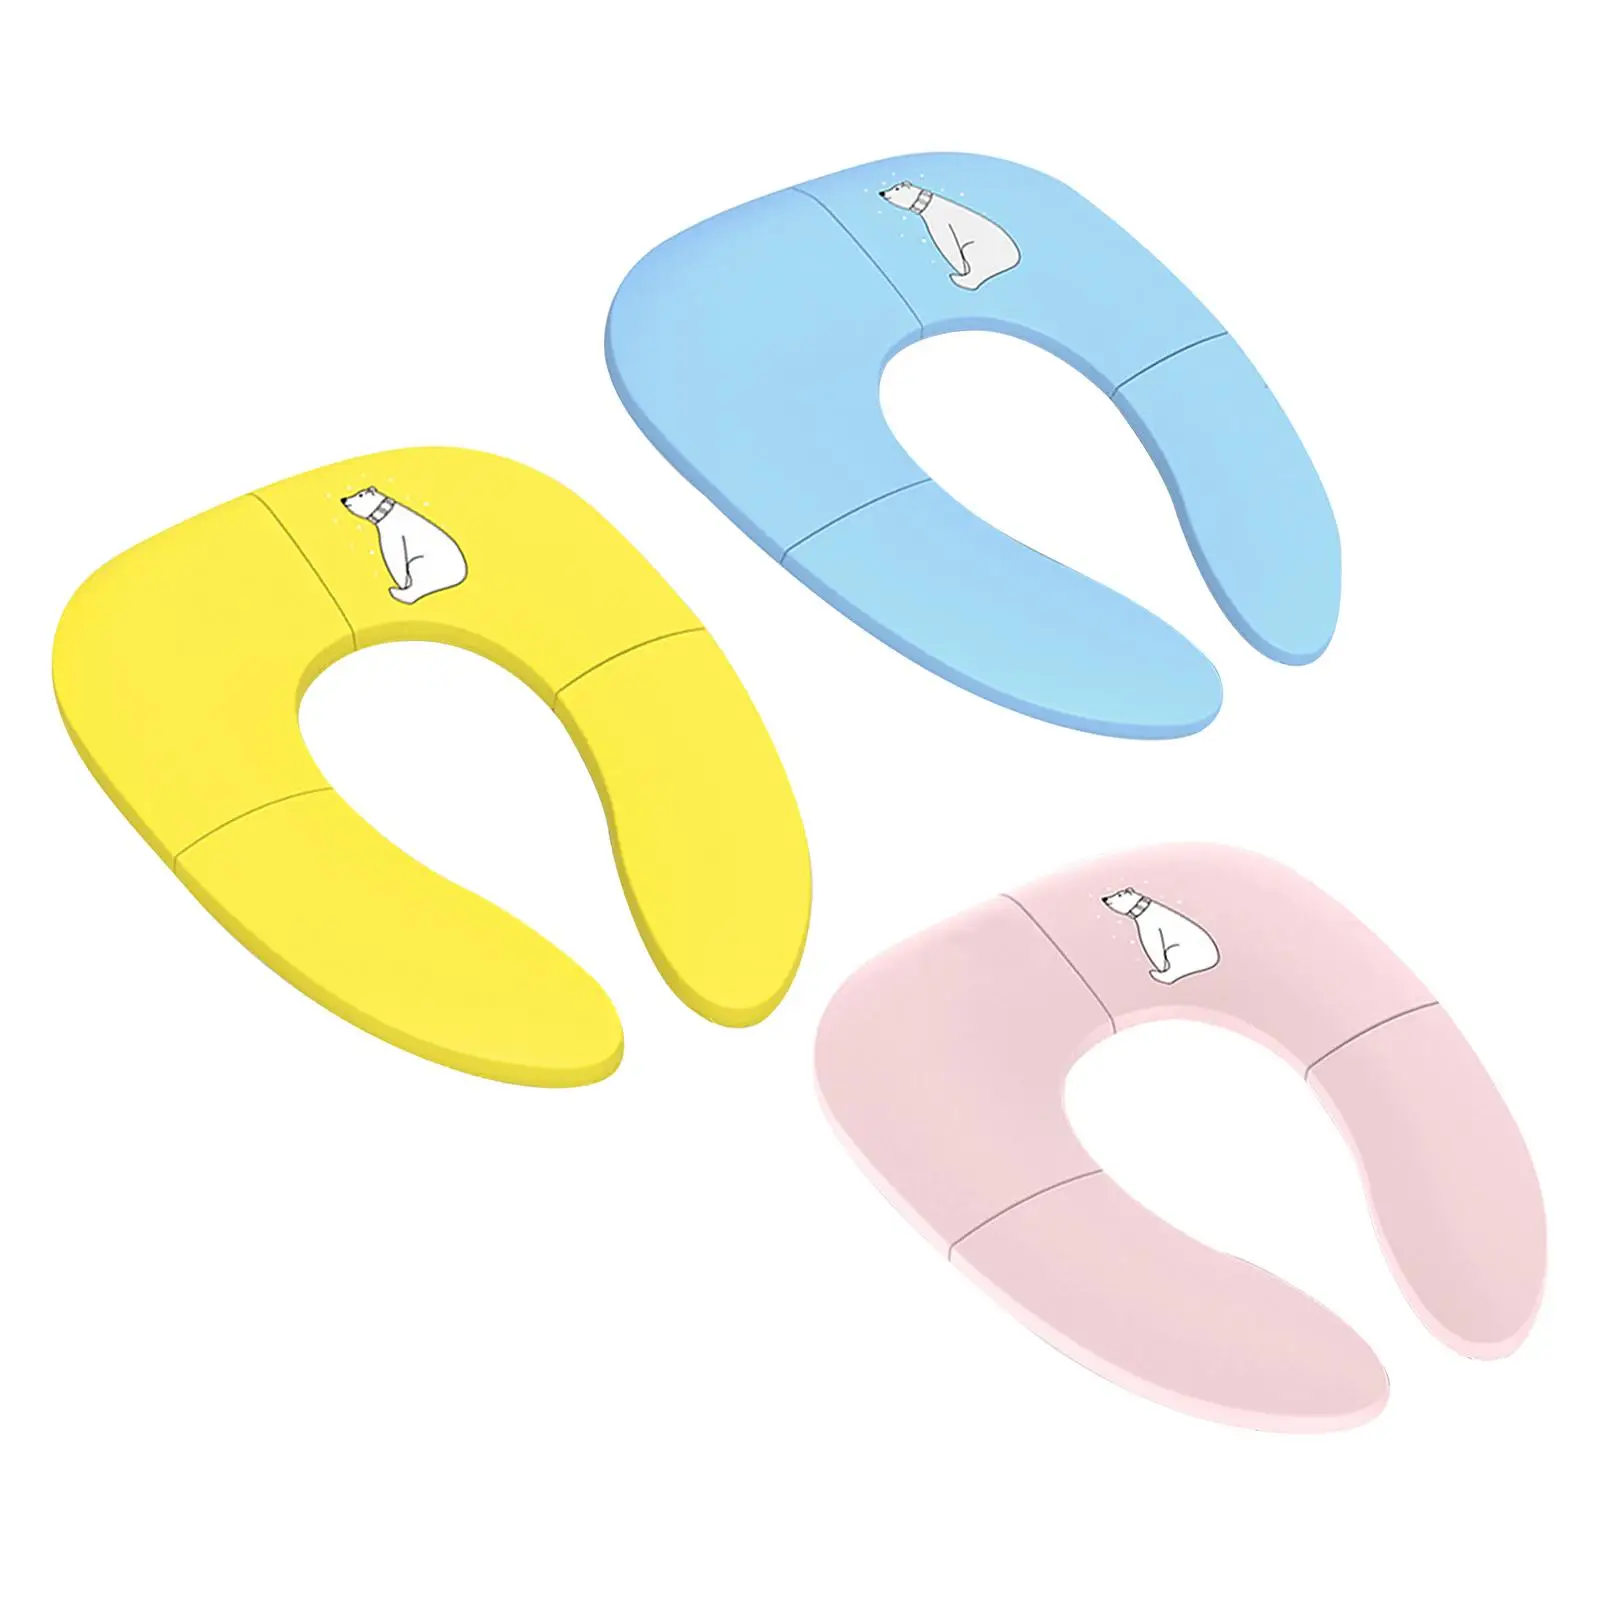 Toilet Seat pad Non Slip Reusable for Round and Oval Toilets Kids Boys